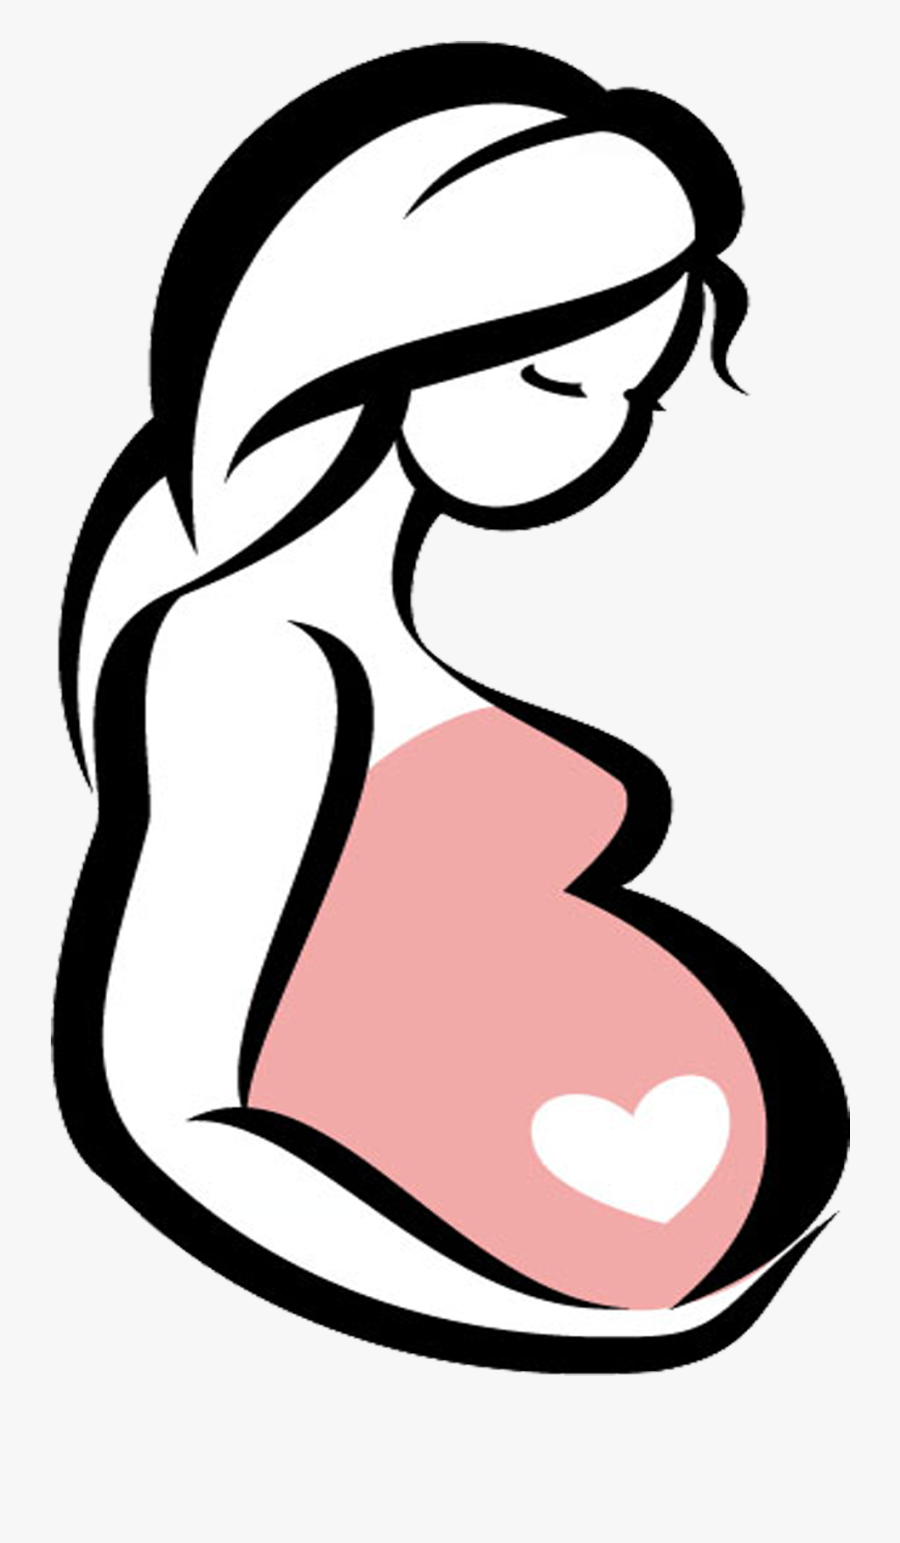 Childbirth Infant Woman Surgery Hand Painted Pregnant - Anti-abortion Movements, Transparent Clipart